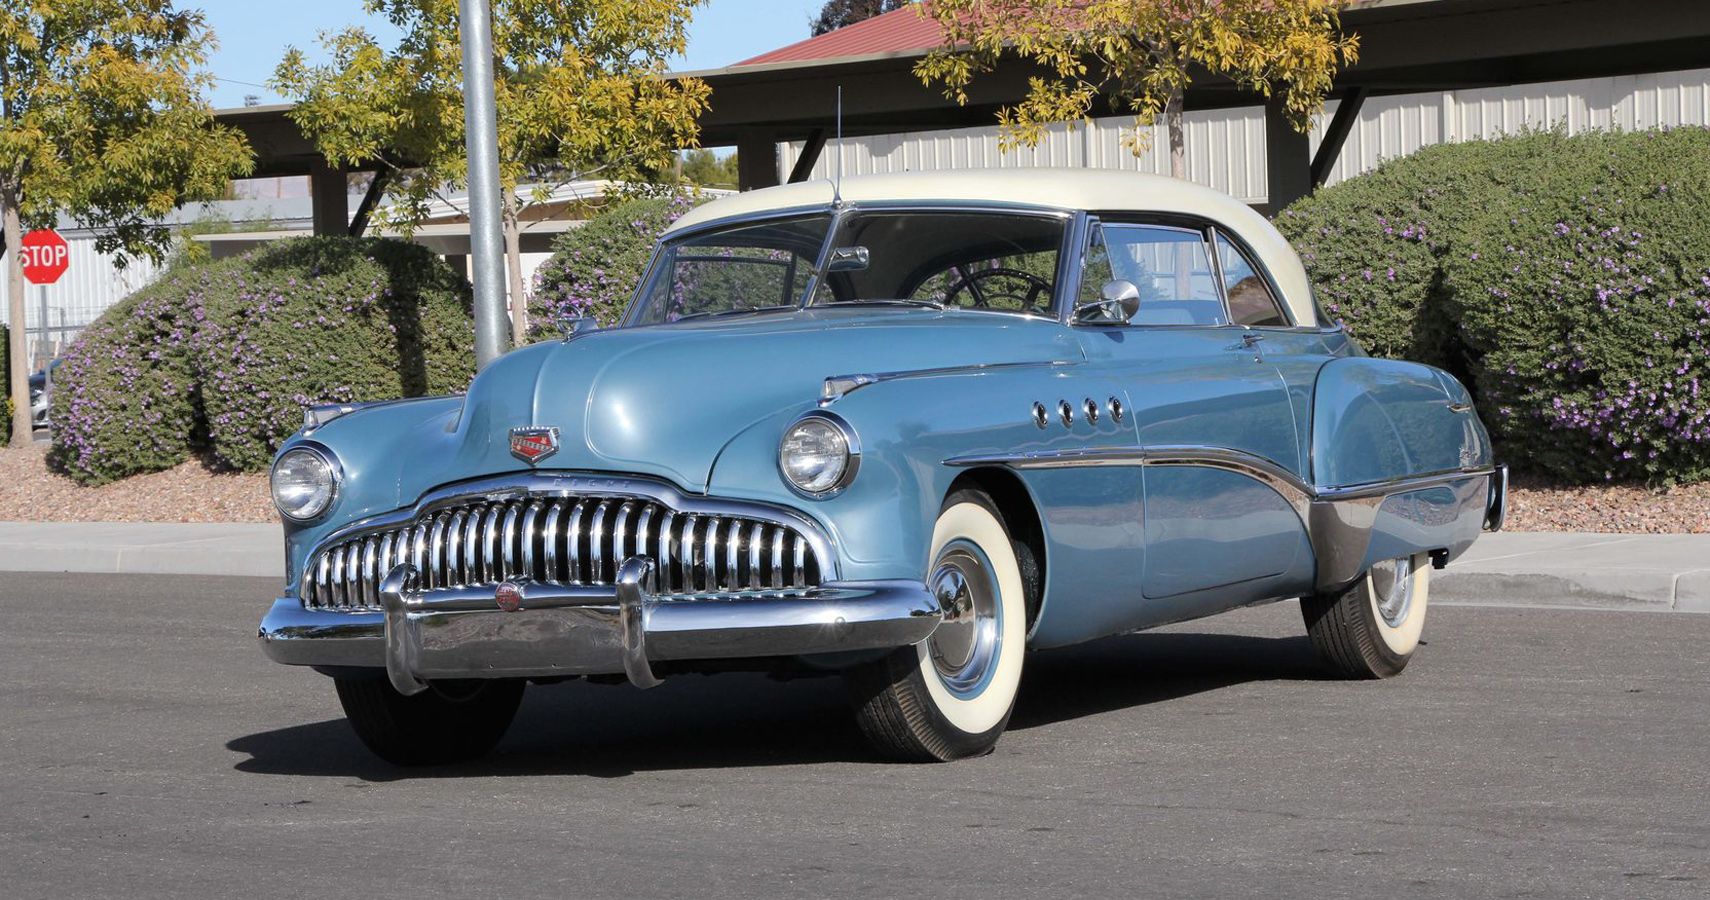 The Riviera Name Was Used As A Trim On The Buick Roadmaster As A Four-Door Hardtop